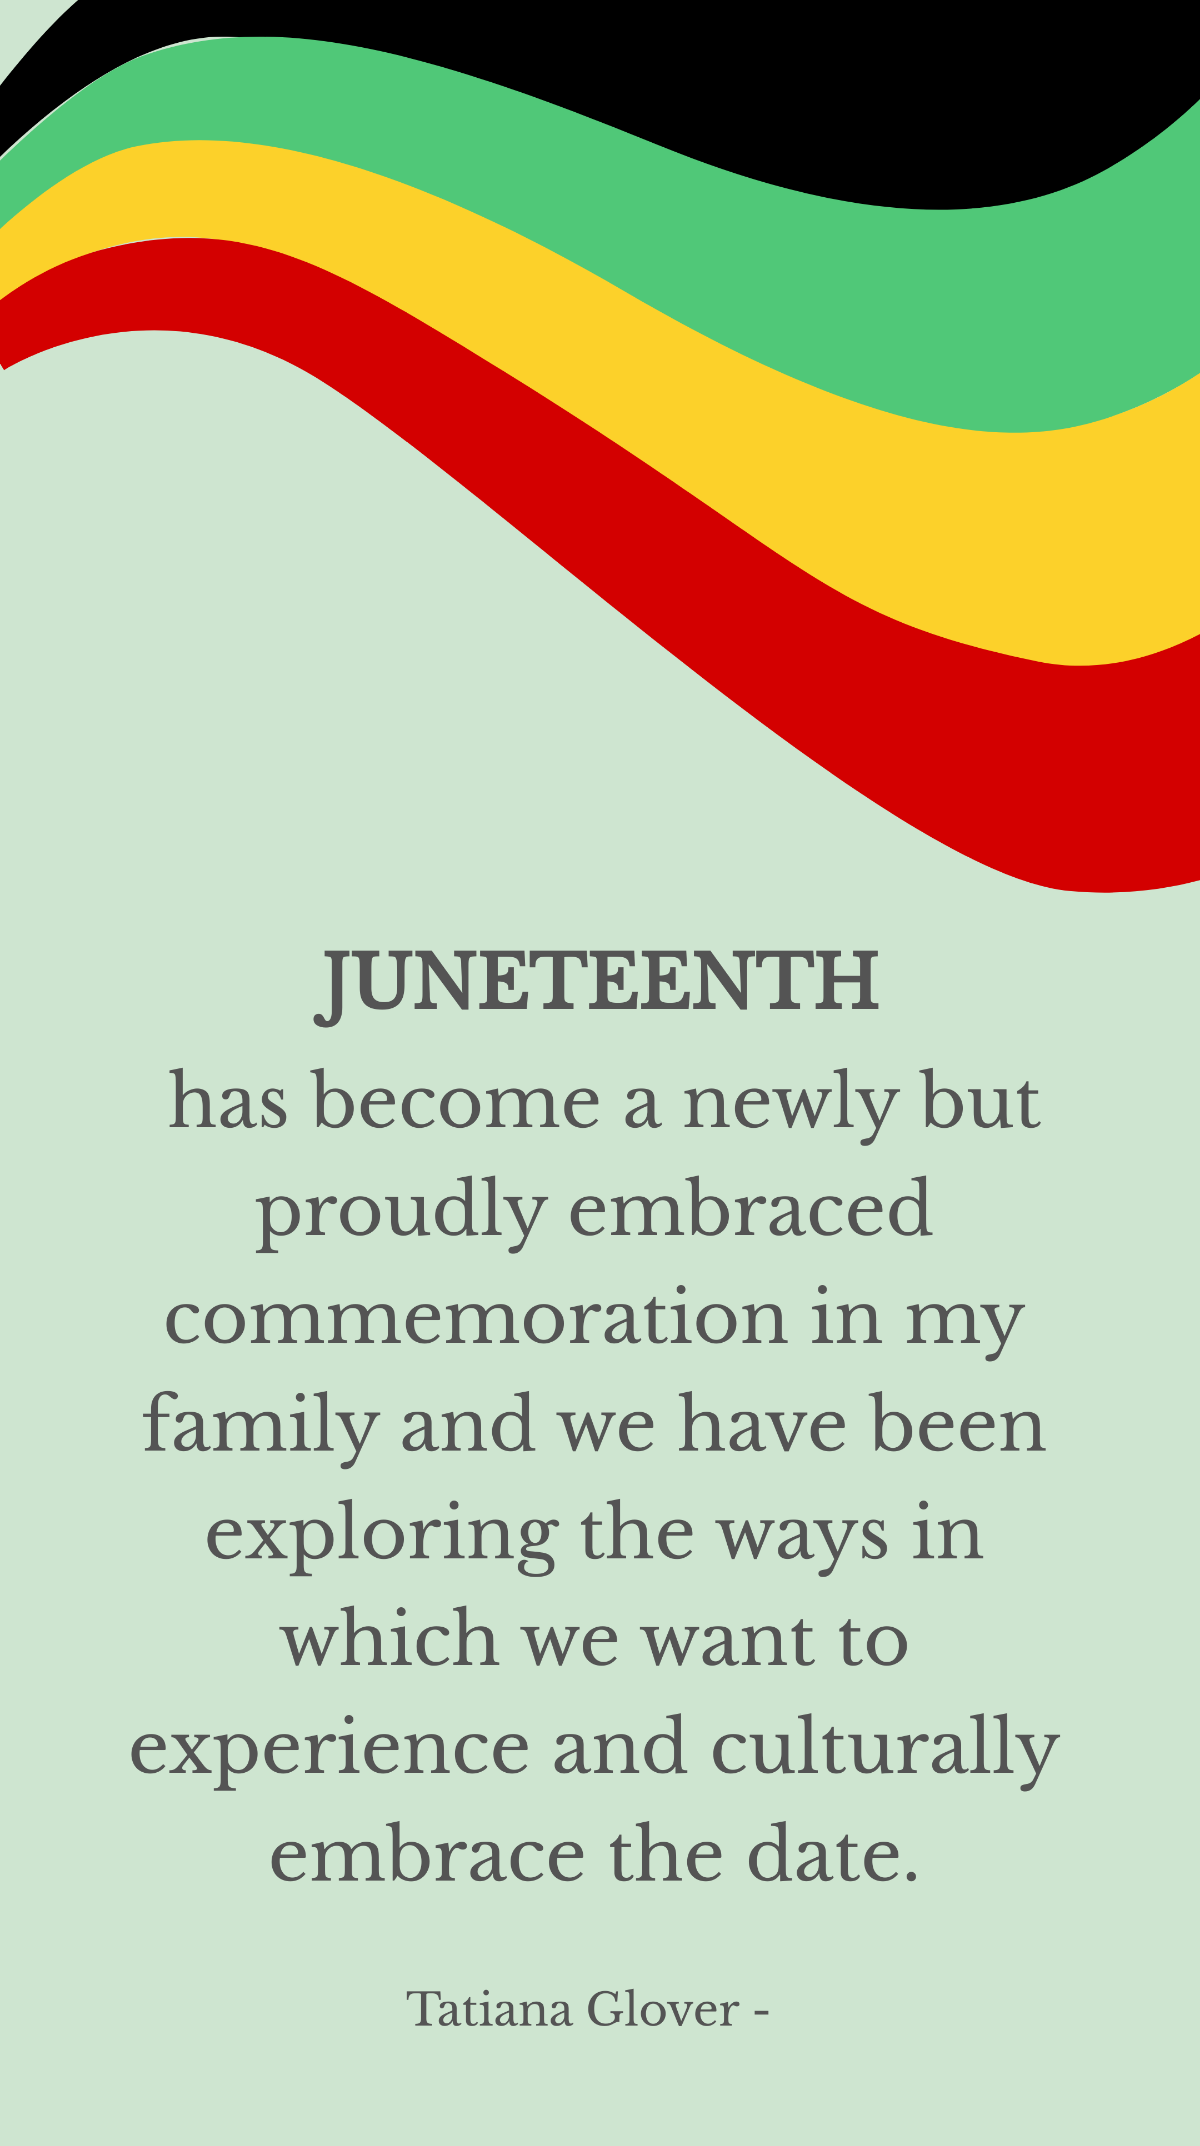 Tatiana Glover - Juneteenth has become a newly but proudly embraced commemoration in my family and we have been exploring the ways in which we want to experience and culturally embrace the date. Templ